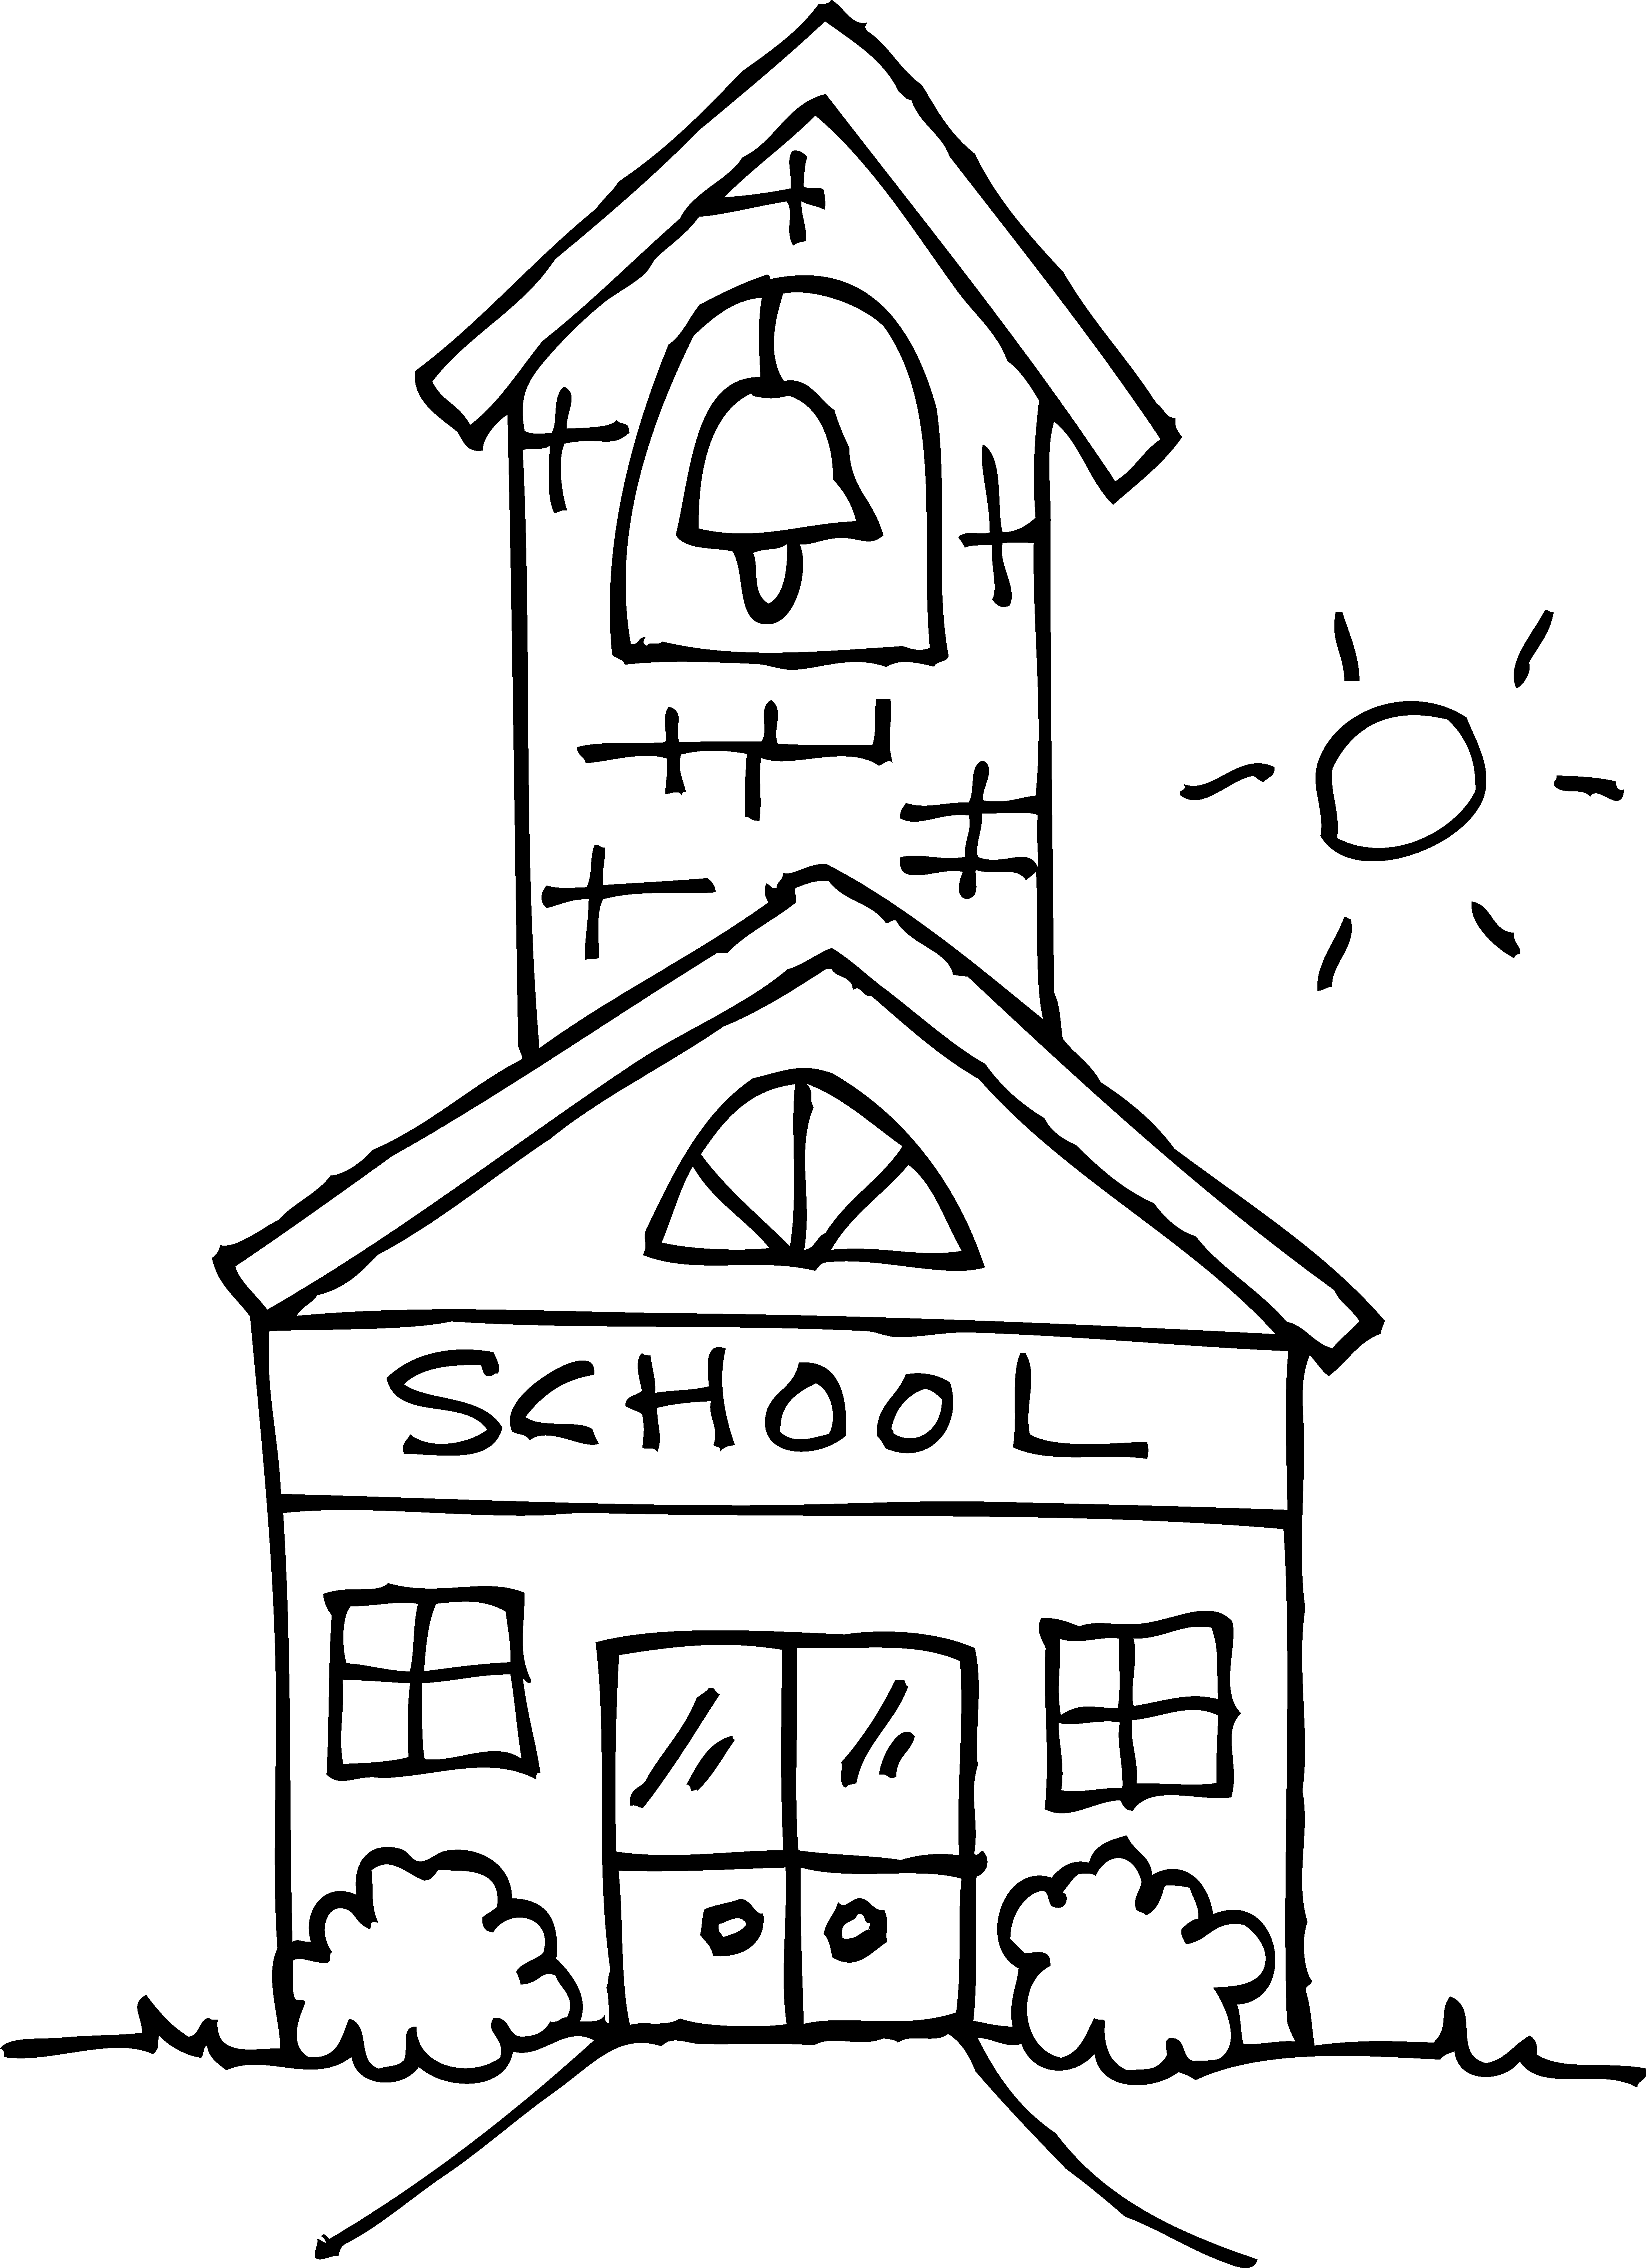 School Clipart Black And White Free School House Outline Cliparts 